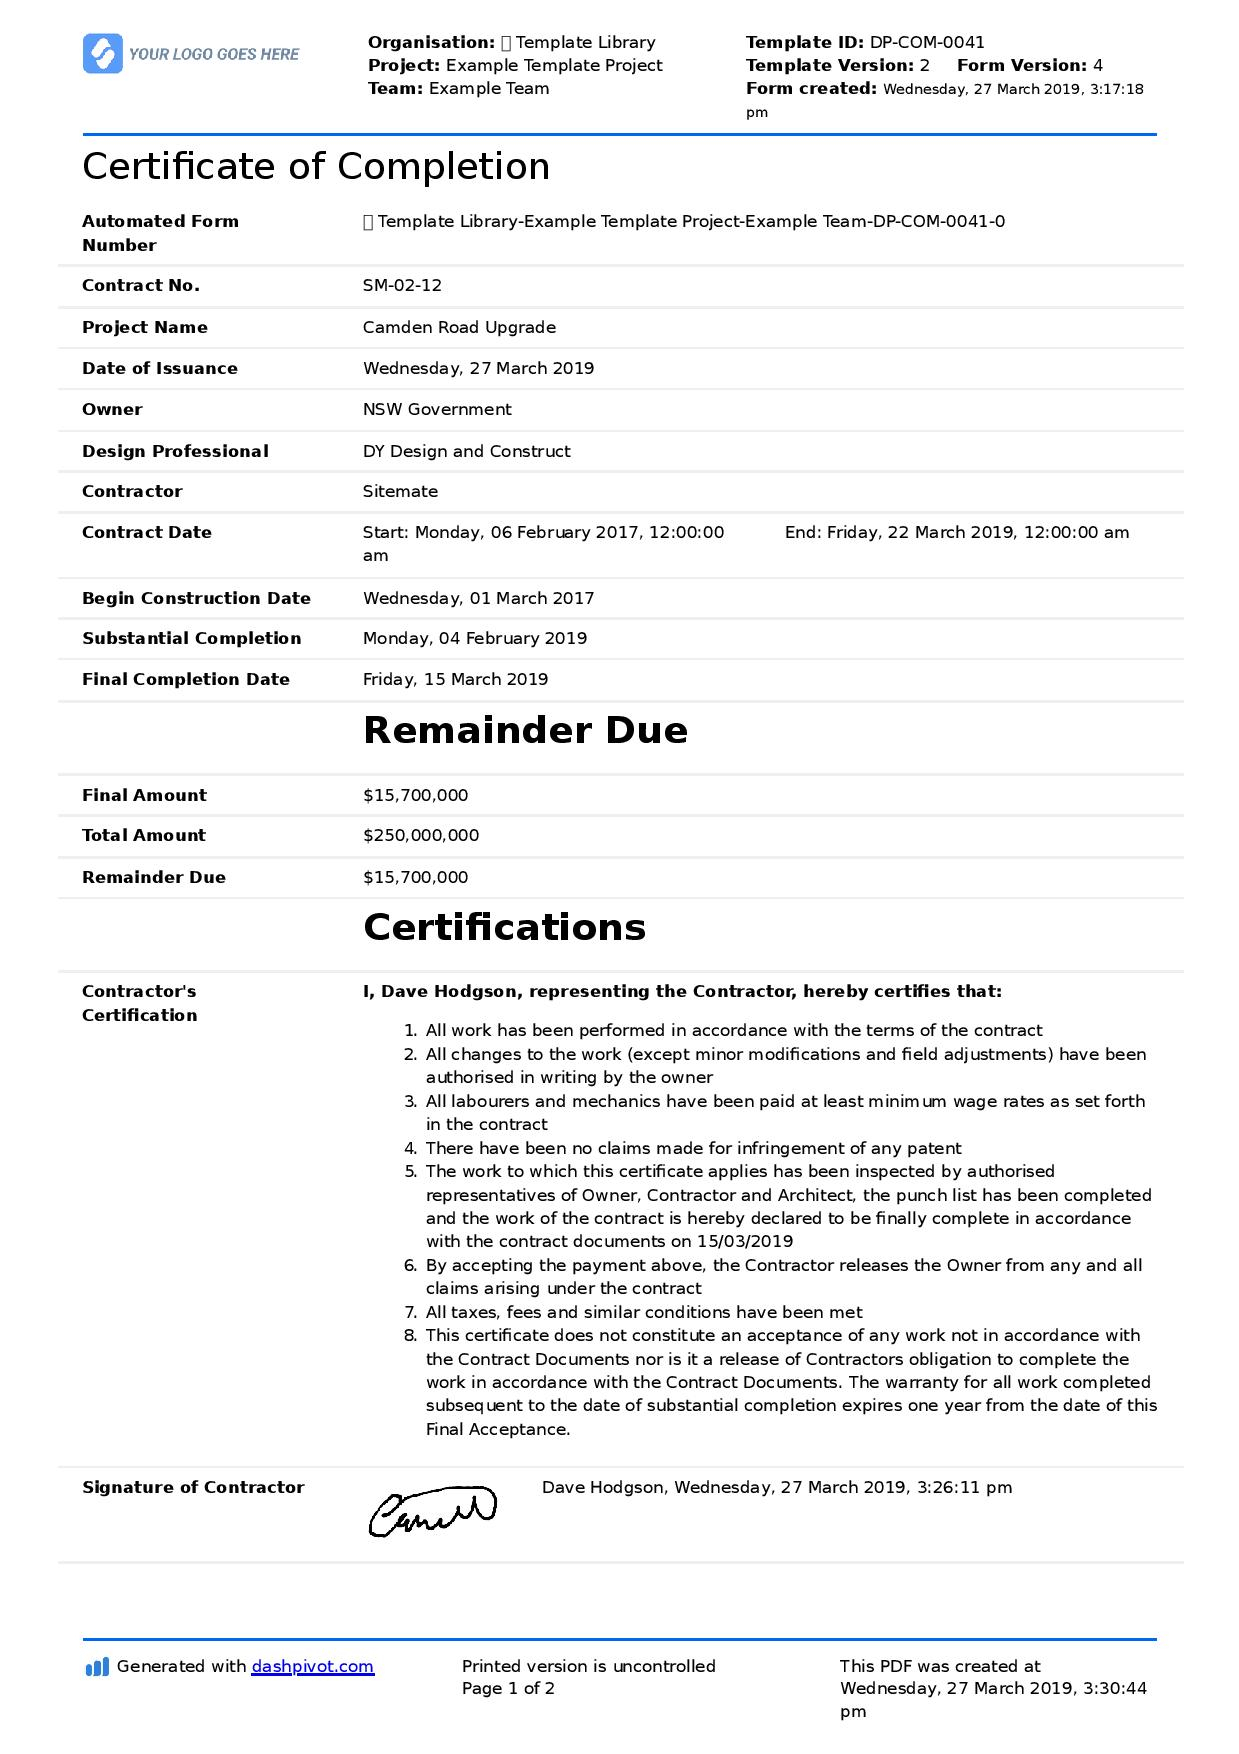 Certificate Of Completion For Construction (Free Template + Intended For Certificate Template For Project Completion